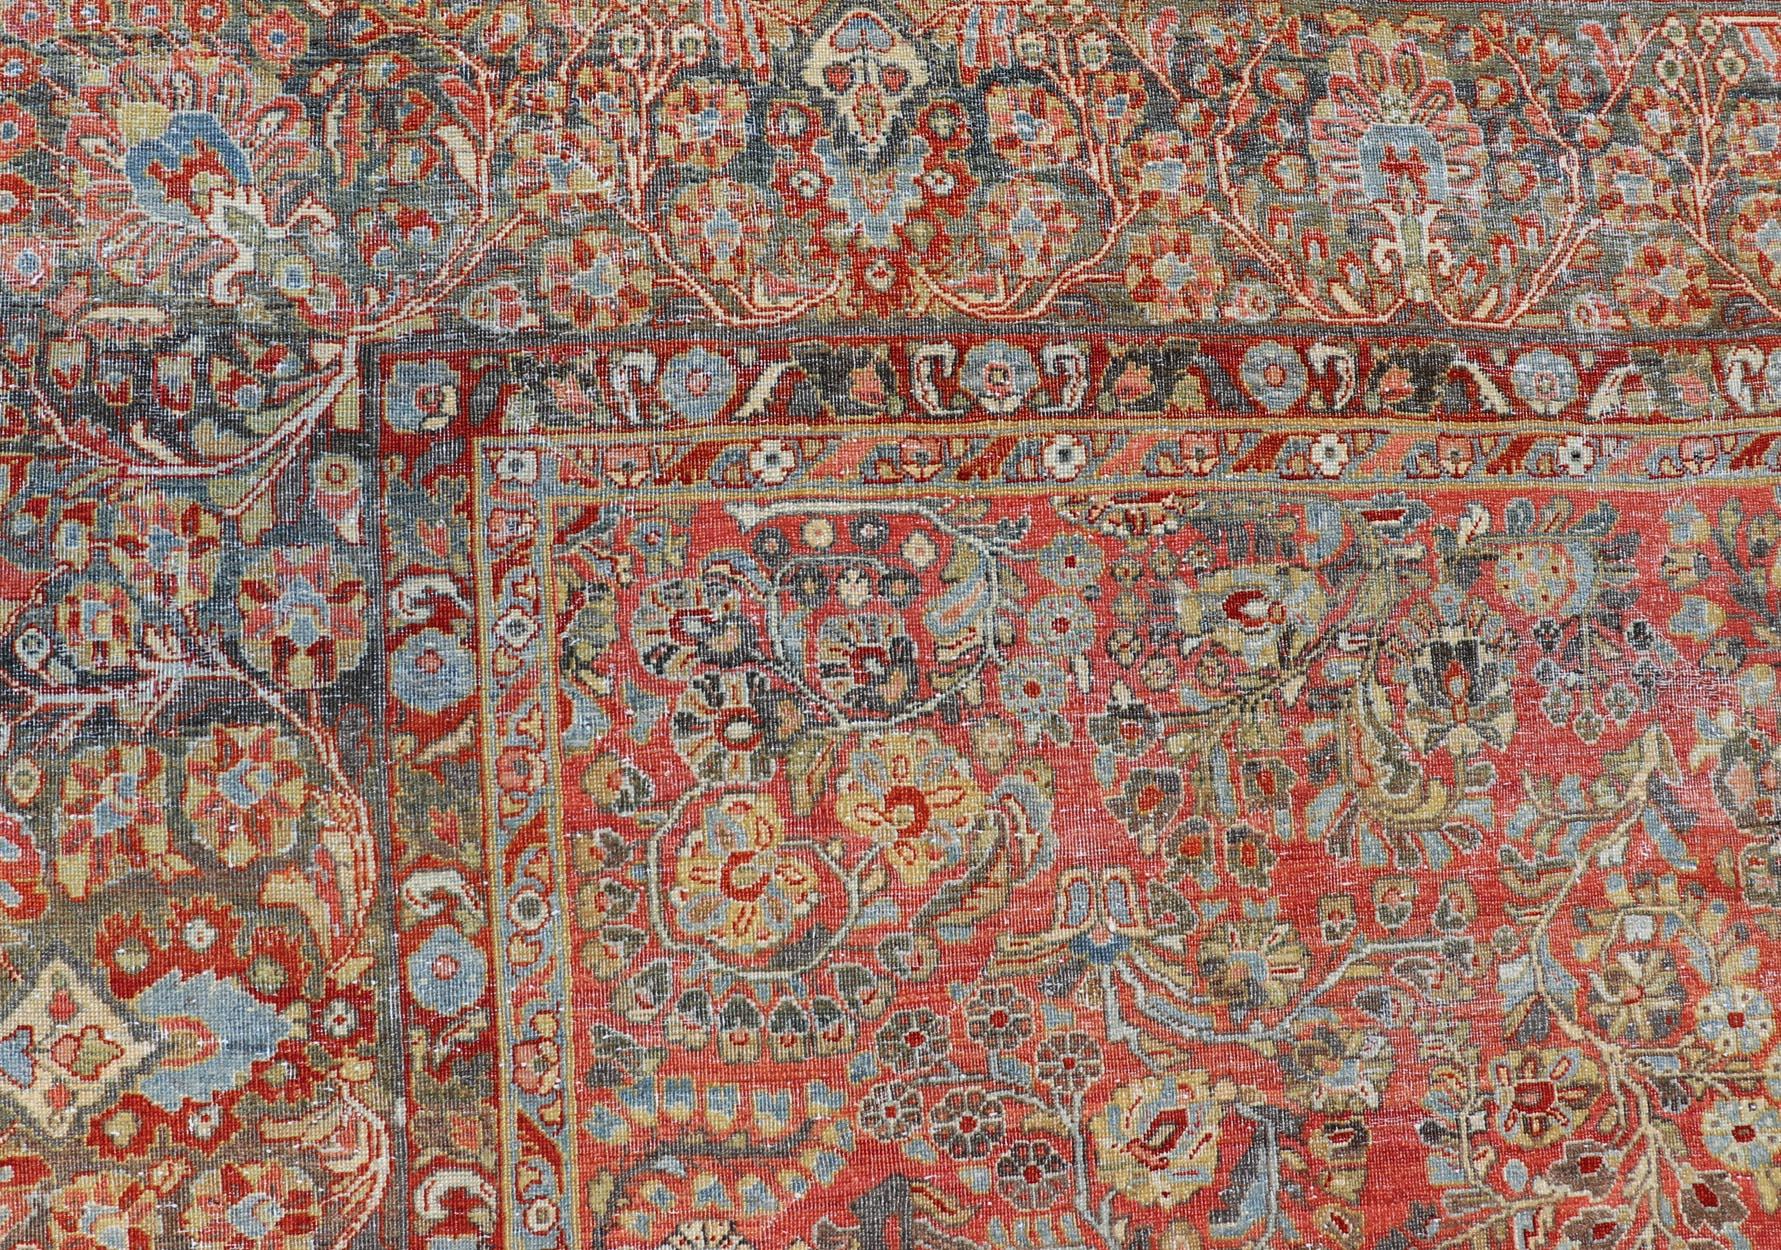 Antique Persian Sarouk with all-over floral design on a light red field 
Keivan Woven Arts / J10-1101, country of origin / type: Iran / Sarouk circa 1920
Measures: 10'2 x 13'3 
This wonderful, early 20th century Persian Sarouk carpet features a